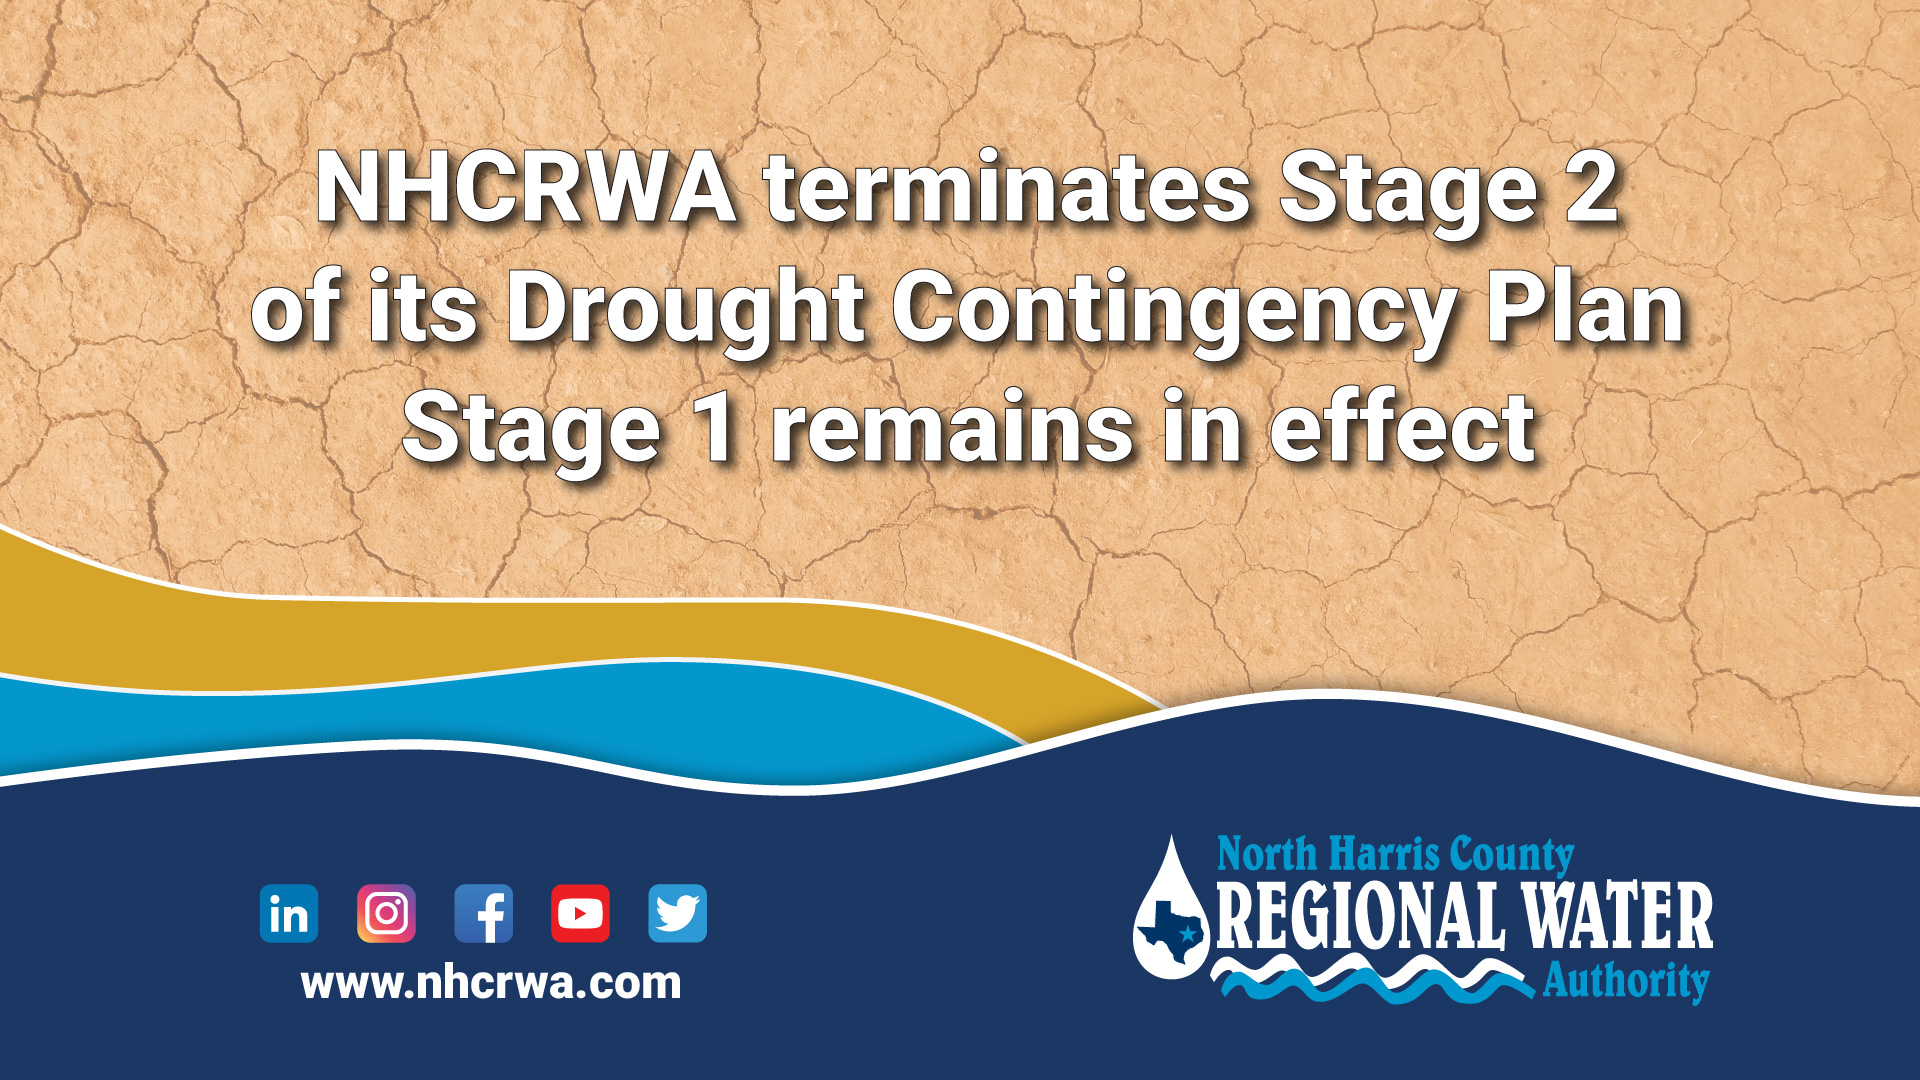 NHCRWA terminates Stage 2 of its Drought Contingency Plan, Stage 1 remains in effect